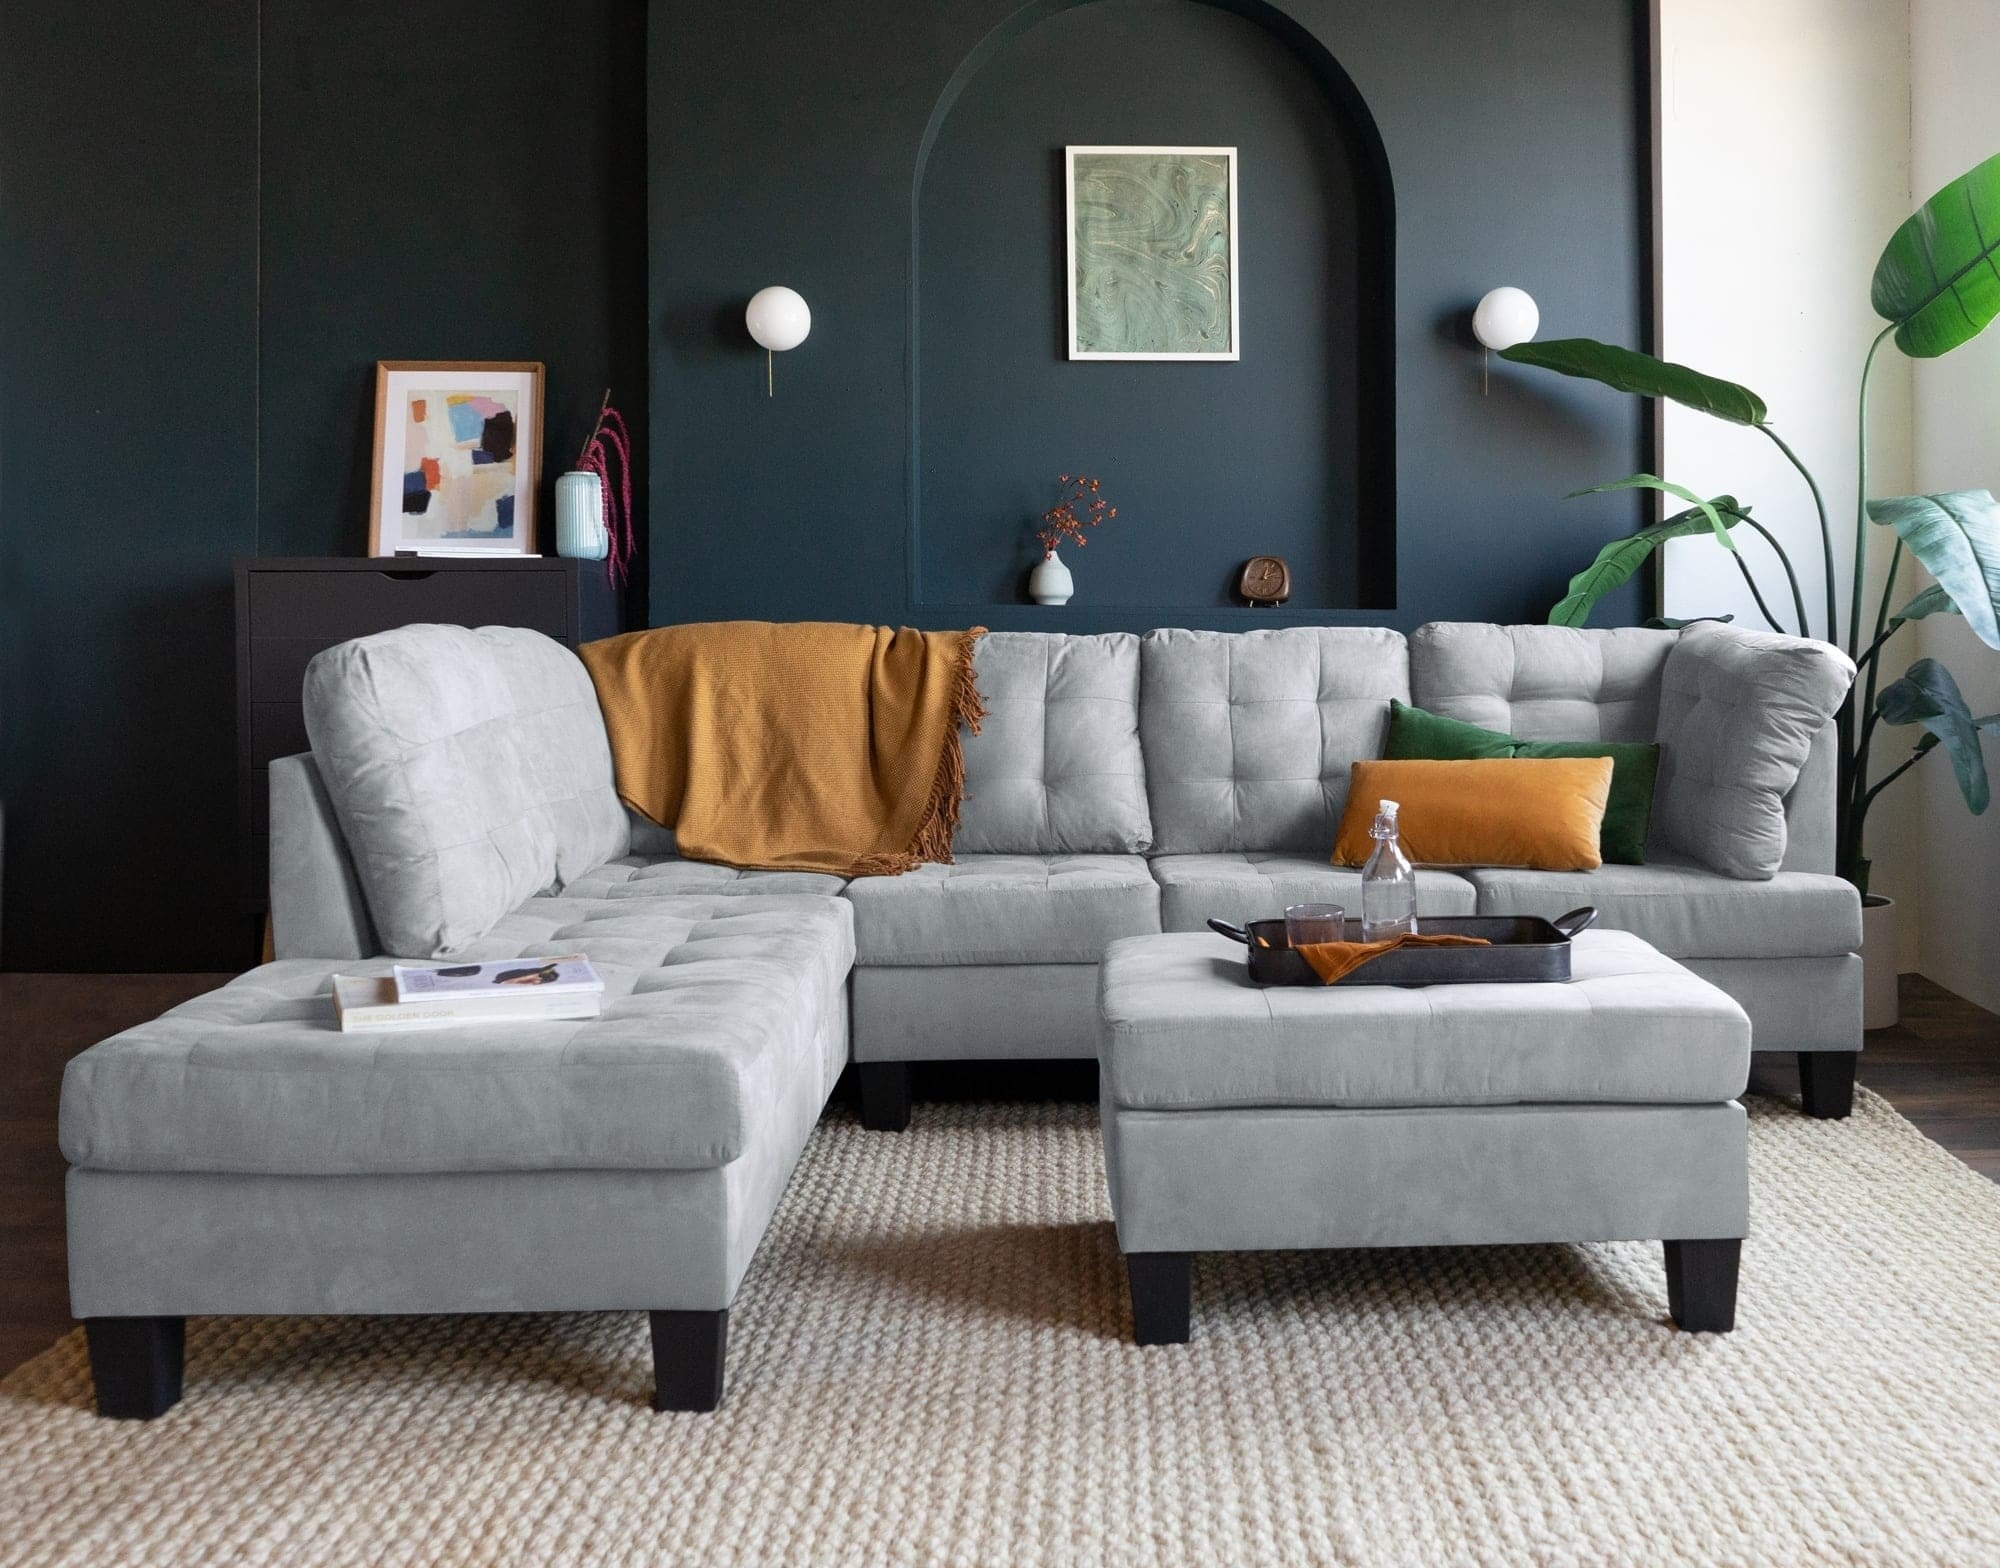 Light gray three-piece sectional set in a living room